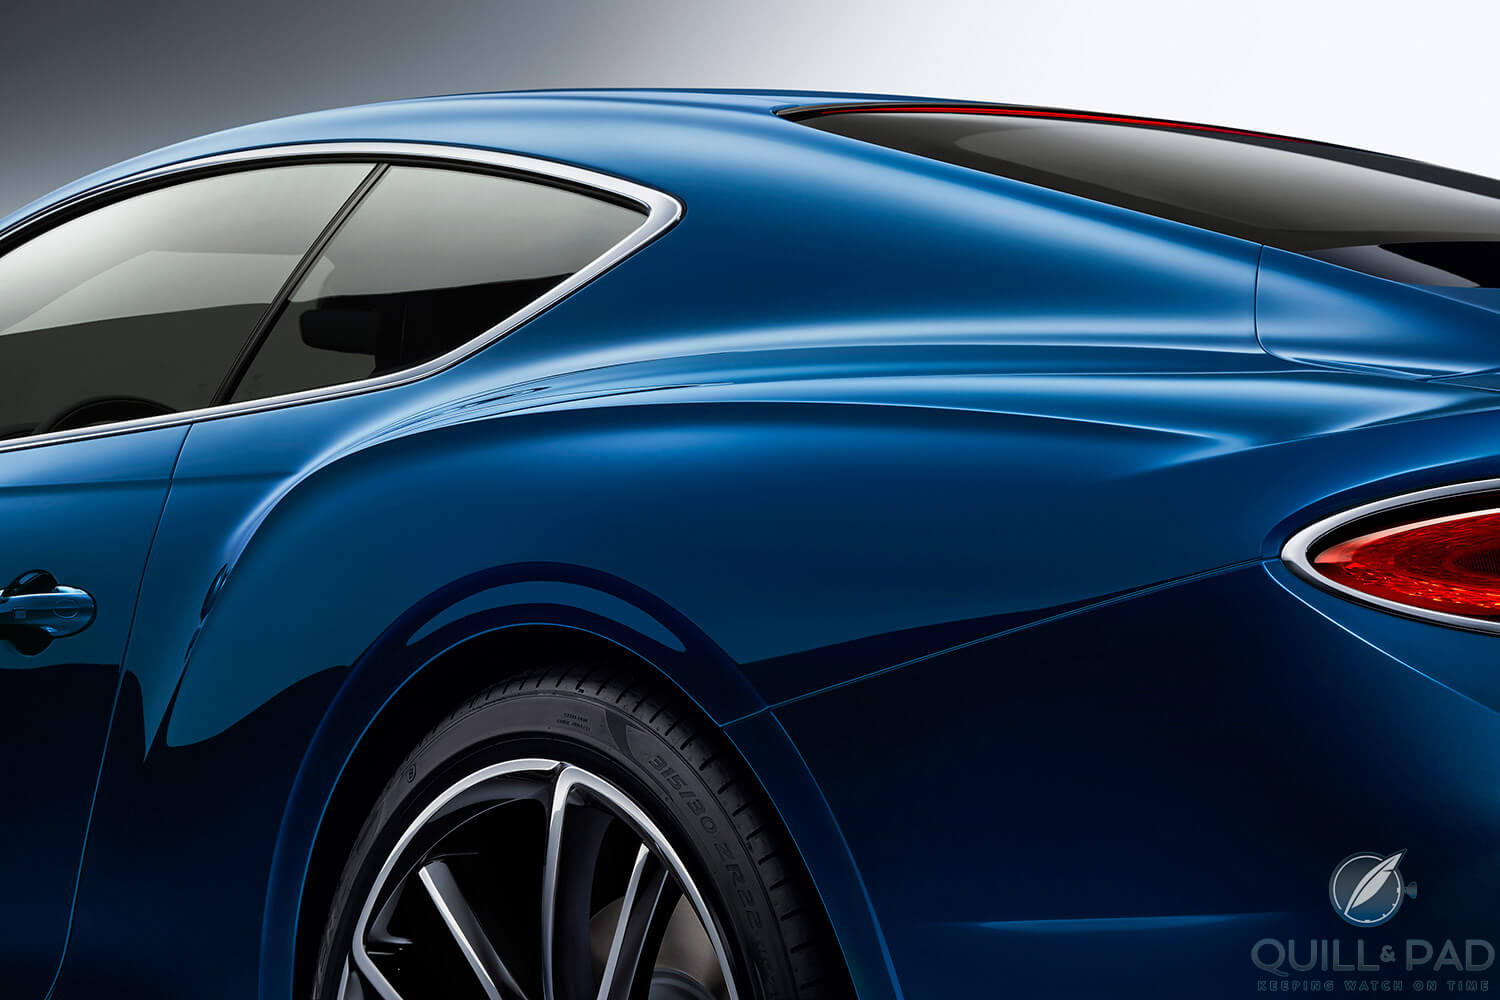 Athletic flanks on the Bentley Continental GT 2018